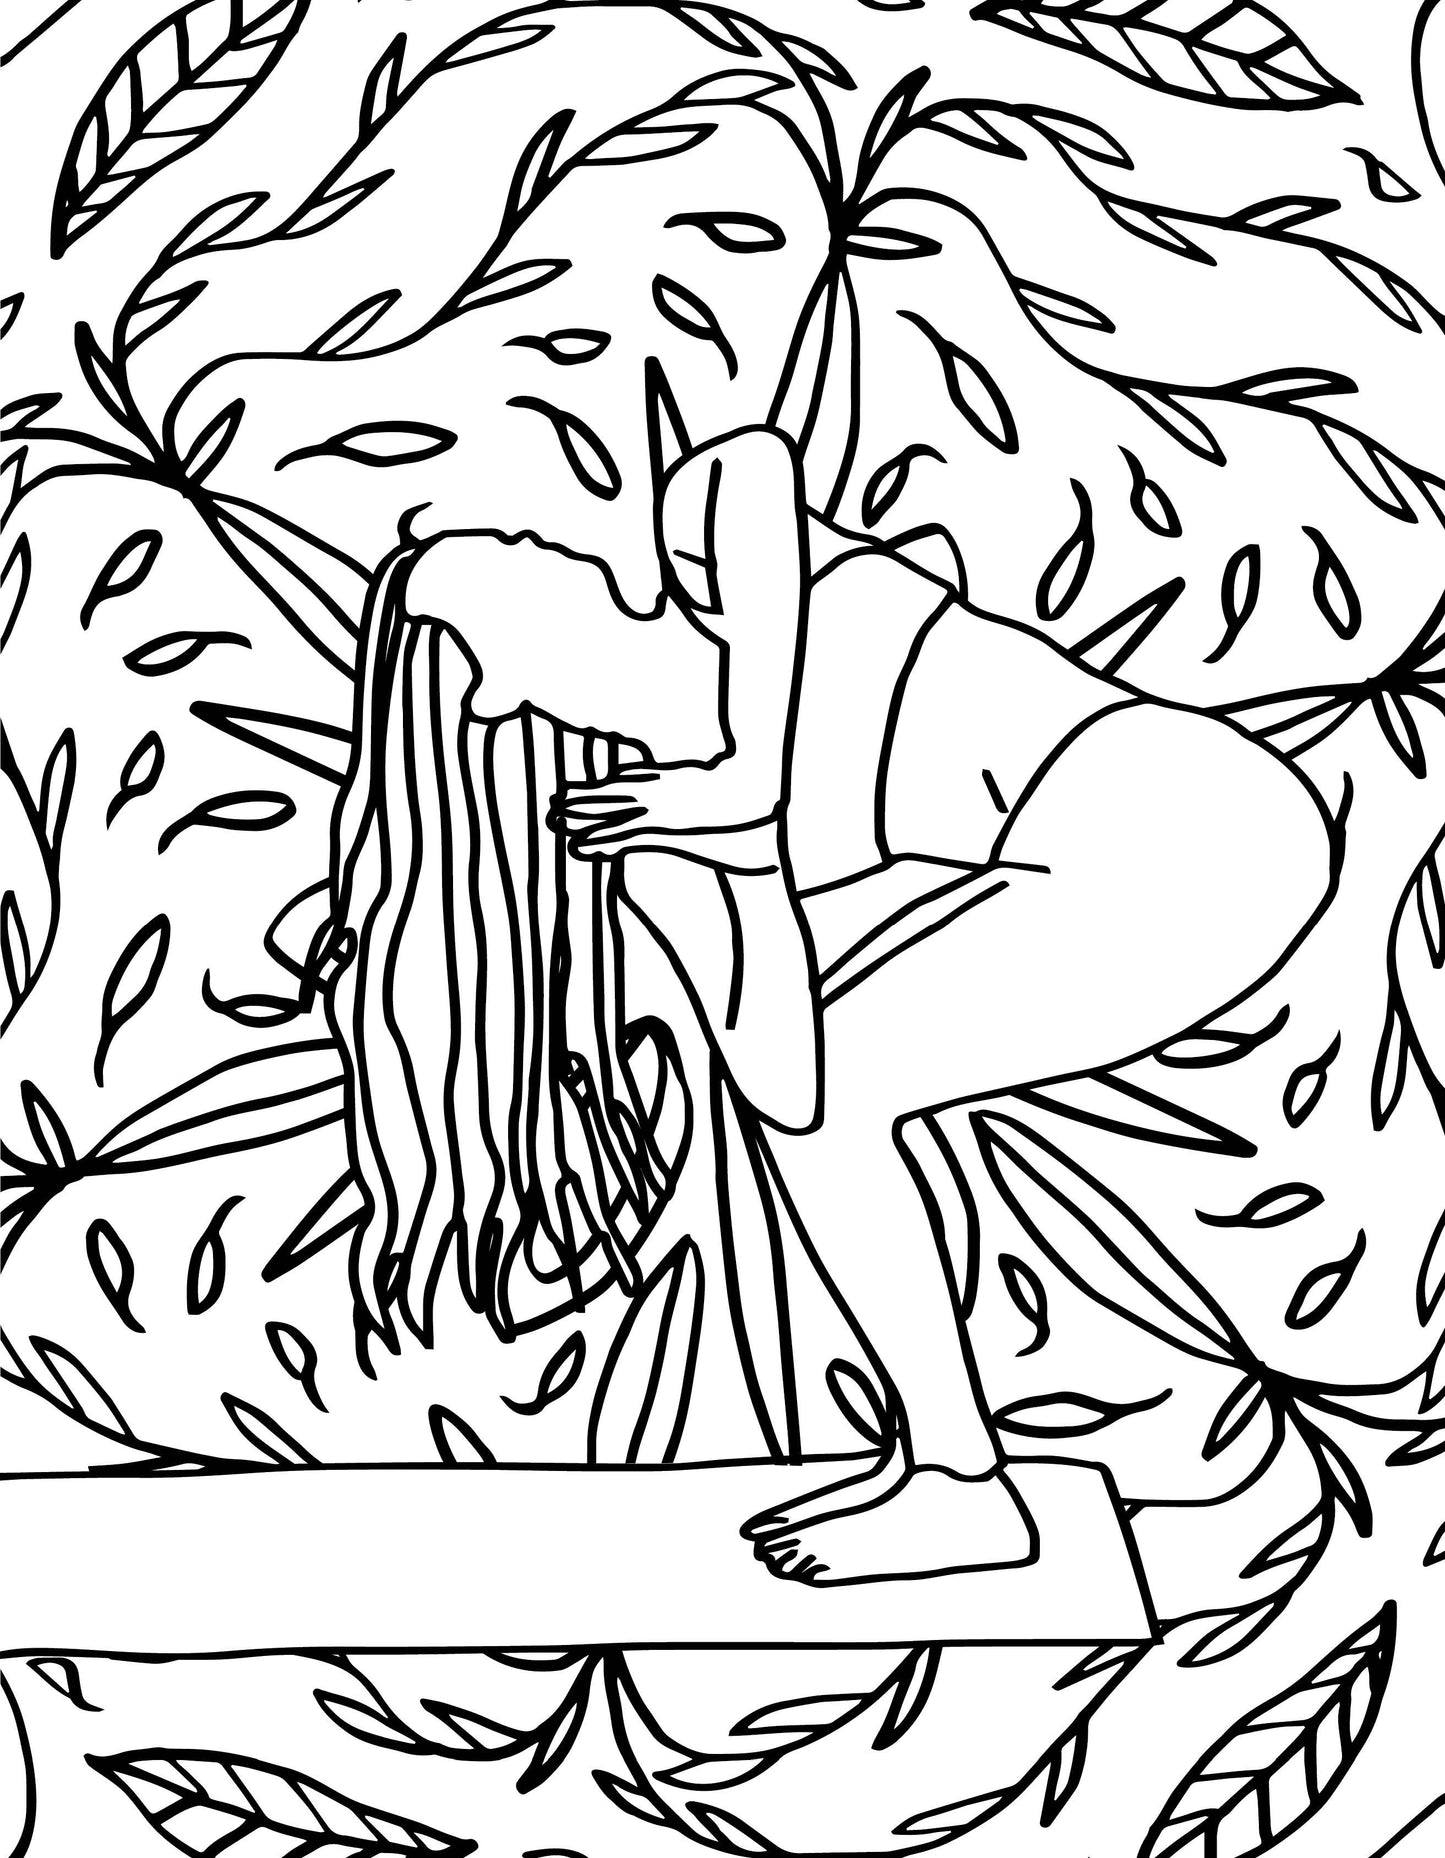 Find Joy Through Color II: A Melanin-Filled Coloring Book for Yogis